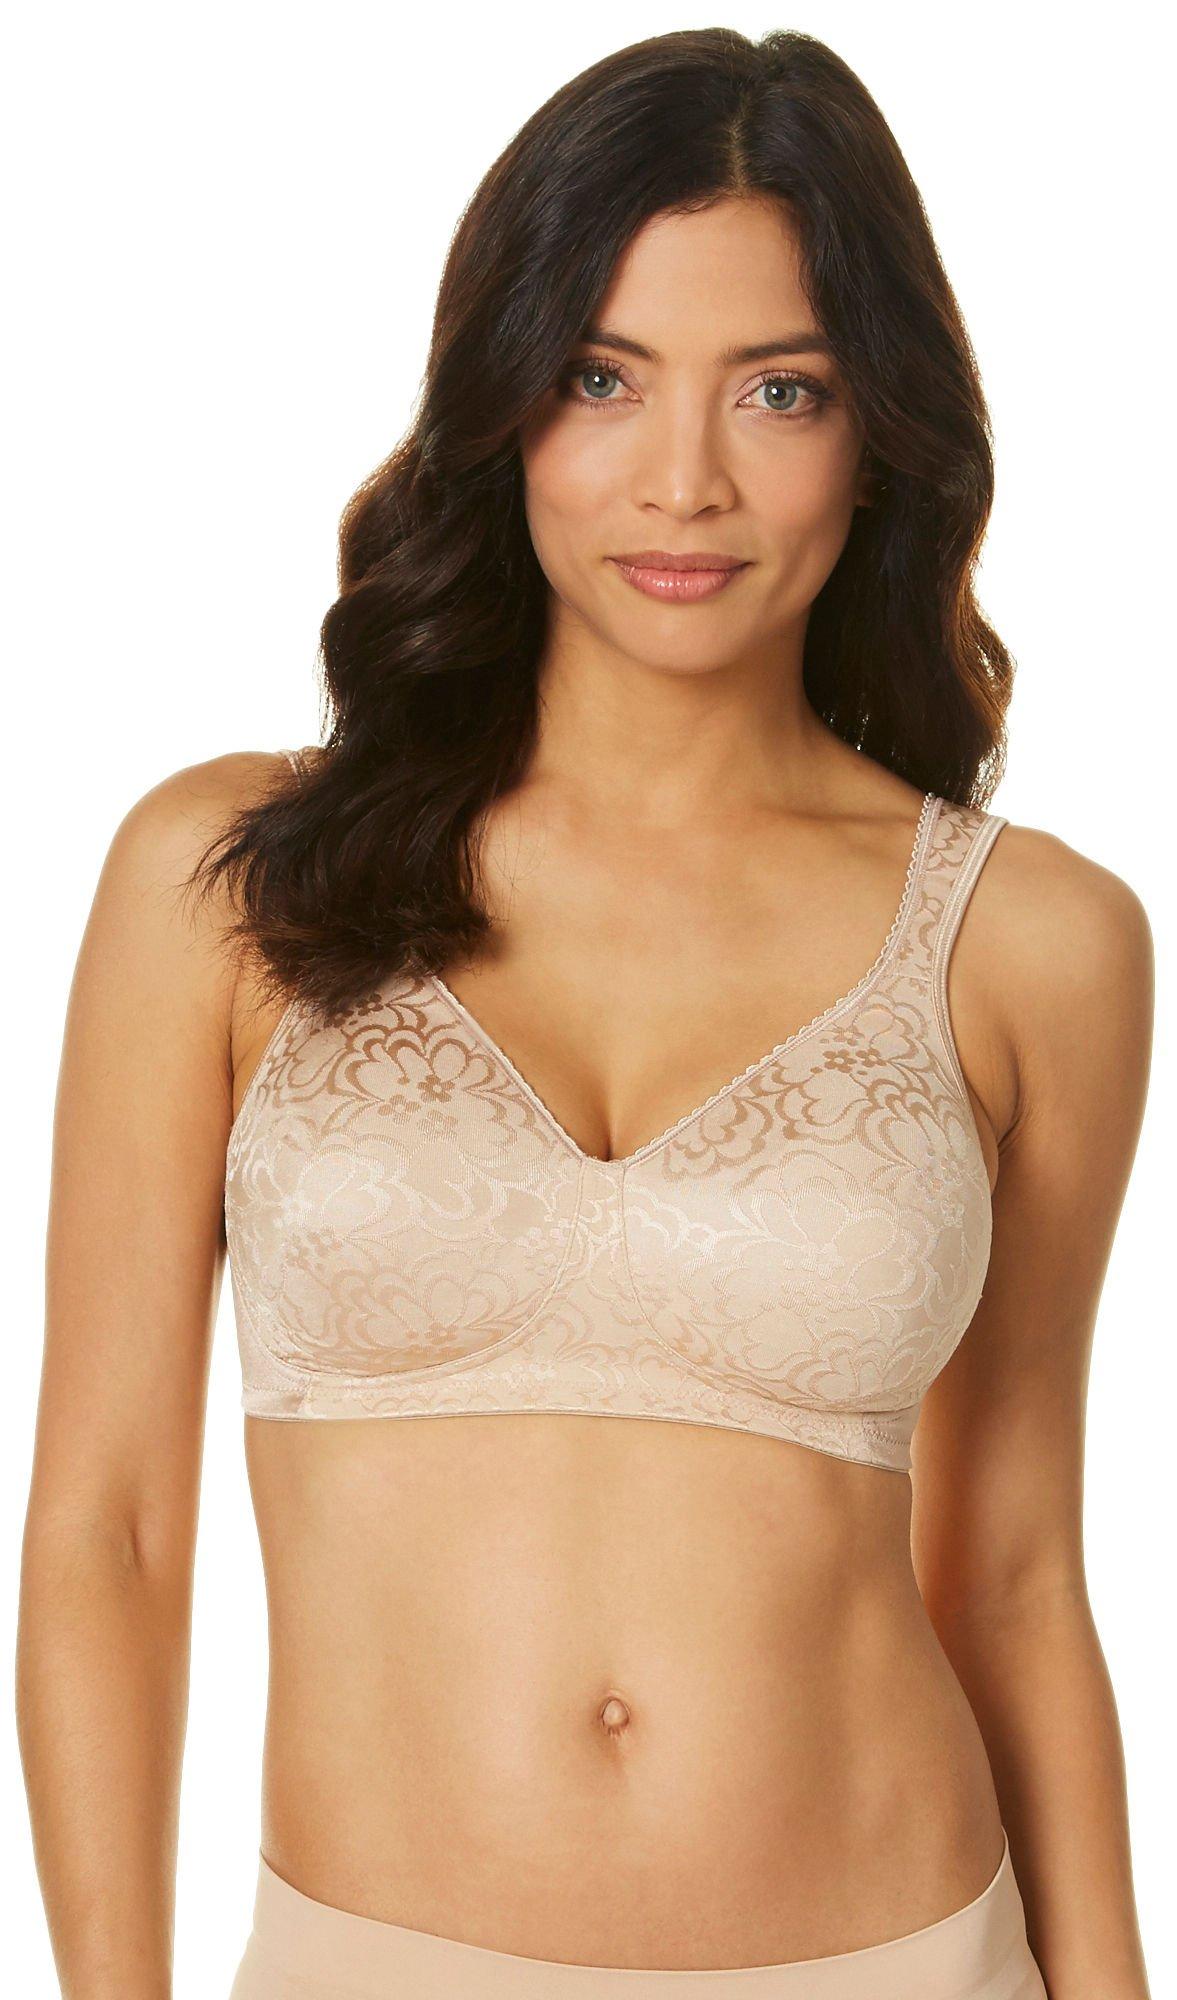 Playtex Women's 18 Hour Ultimate Lift and Support Wire-Free Bra - 4745 46G  Black